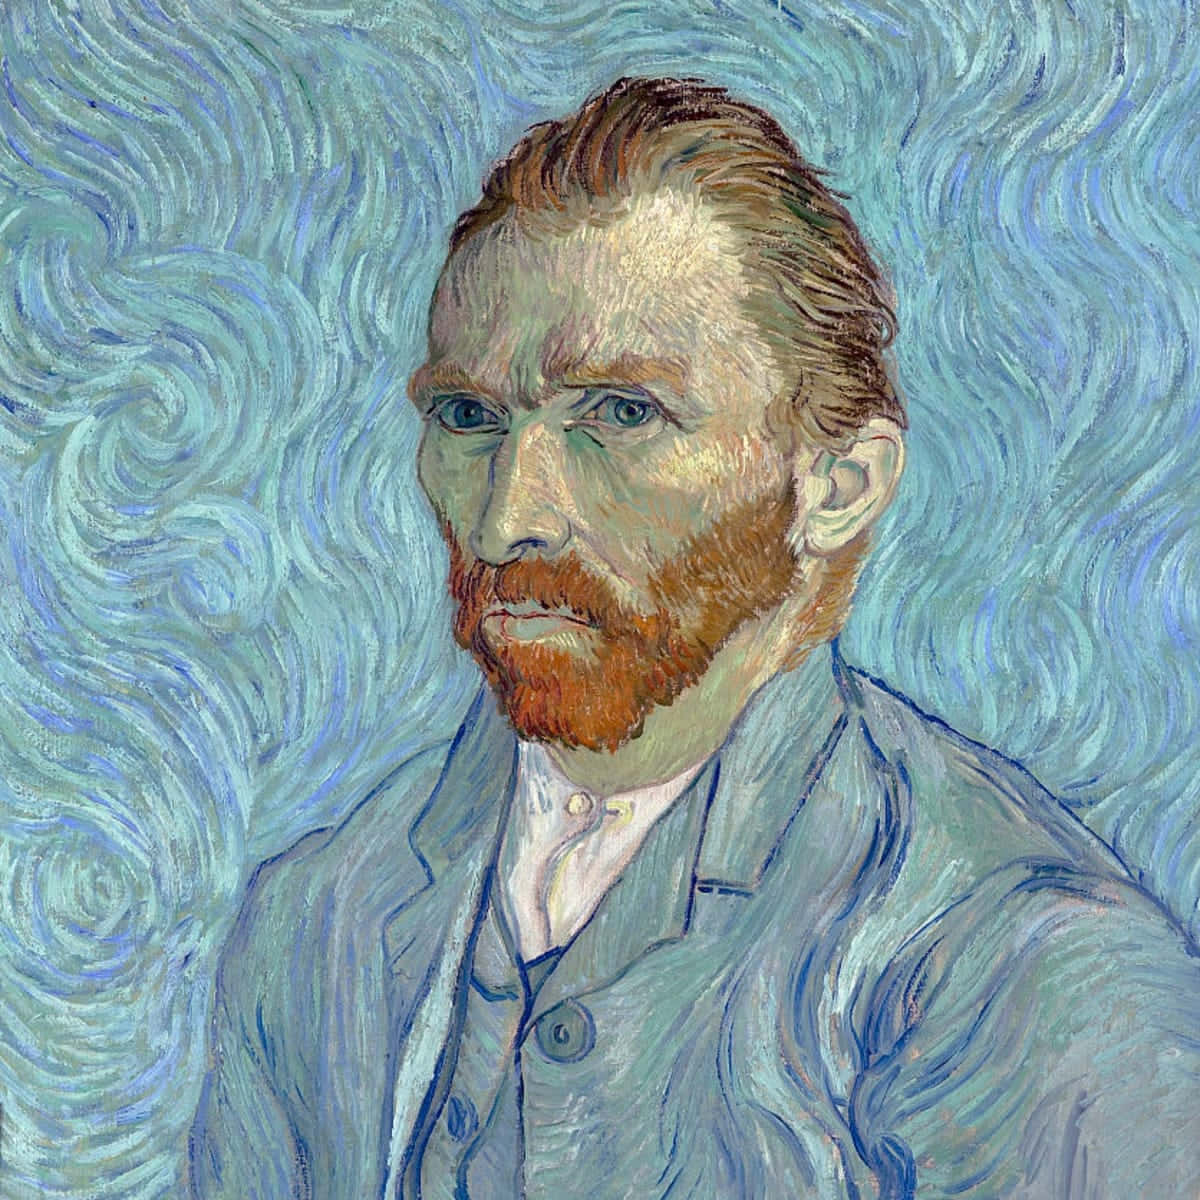 A Painting Of A Man With A Beard